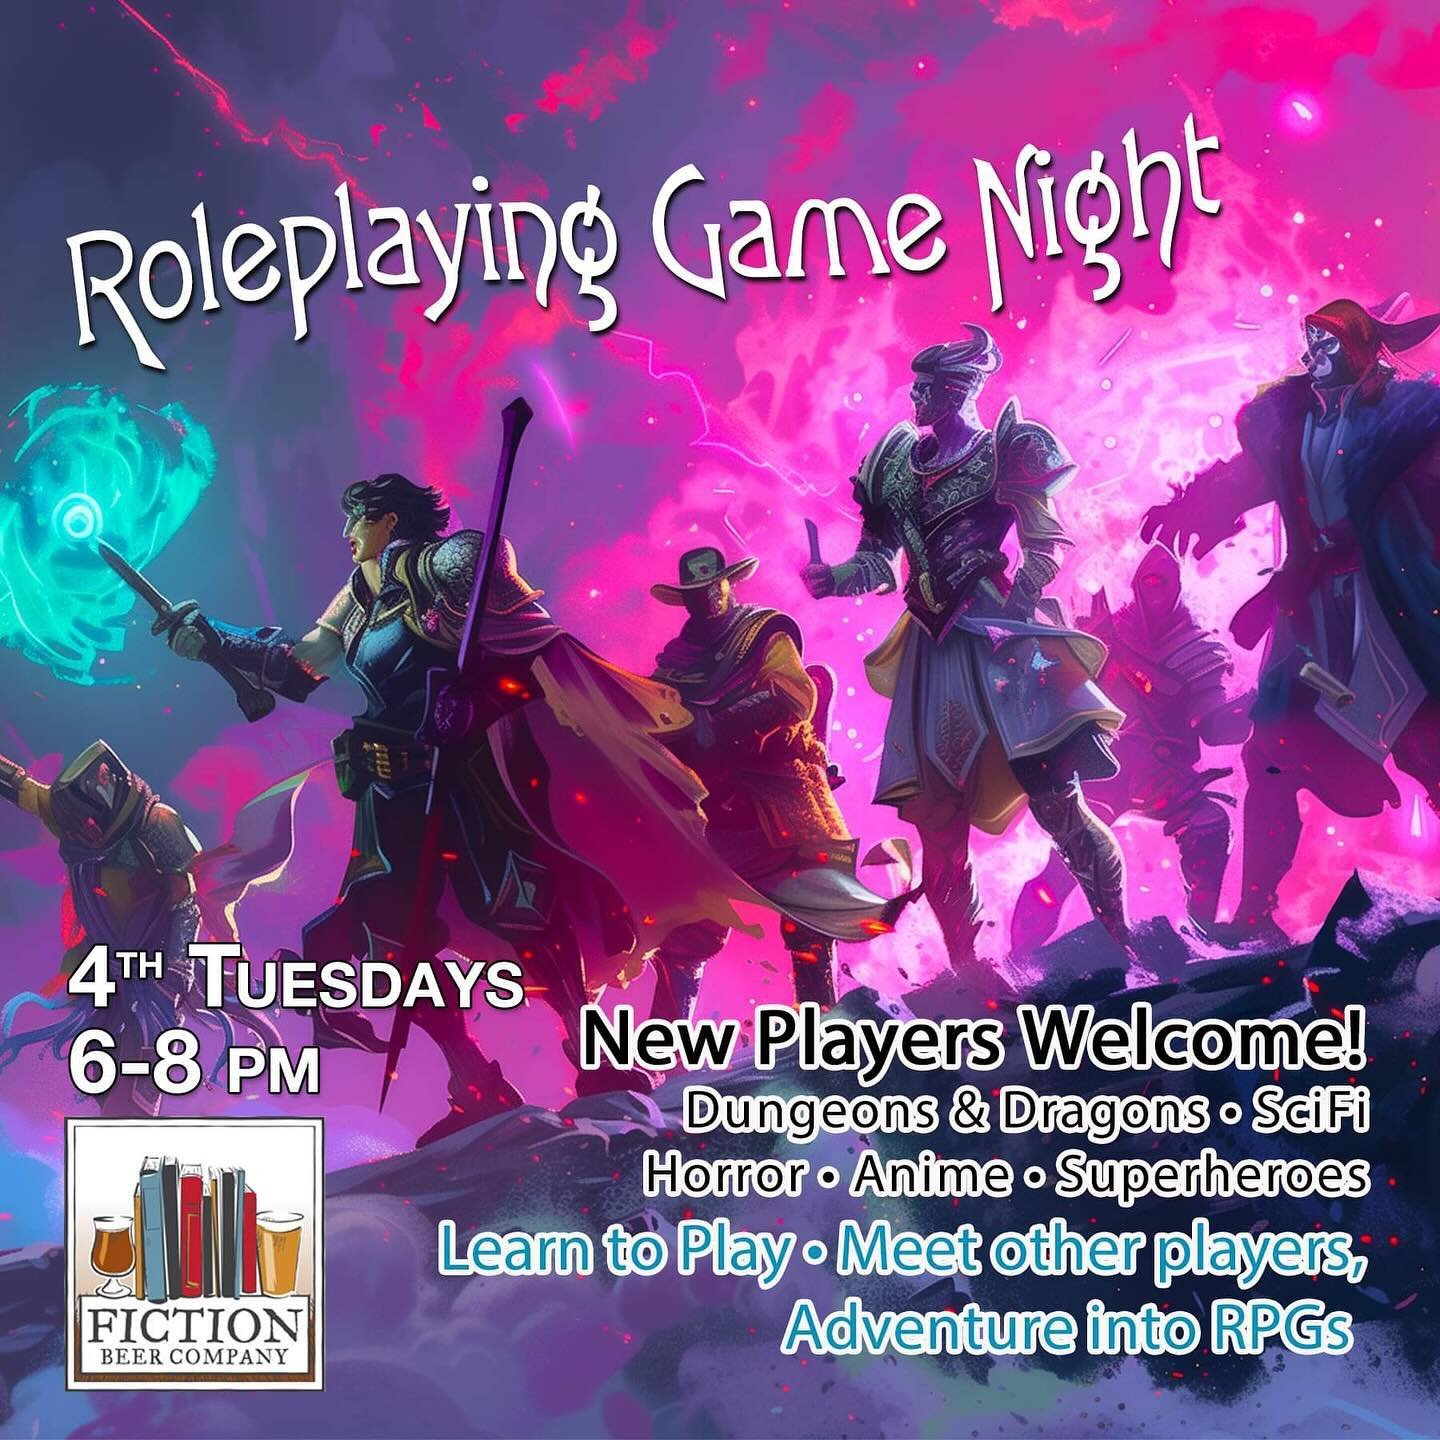 Heya game fans! We&rsquo;re back it with PlayTest Tuesday on May 14th from 6-8pm and are excited to introduce a brand new game night: Role Play Tuesday on May 28th from 6-8pm. Both nights are hosted by @cheekydingo of Cheeky Dingo Entertainment. 

Pl